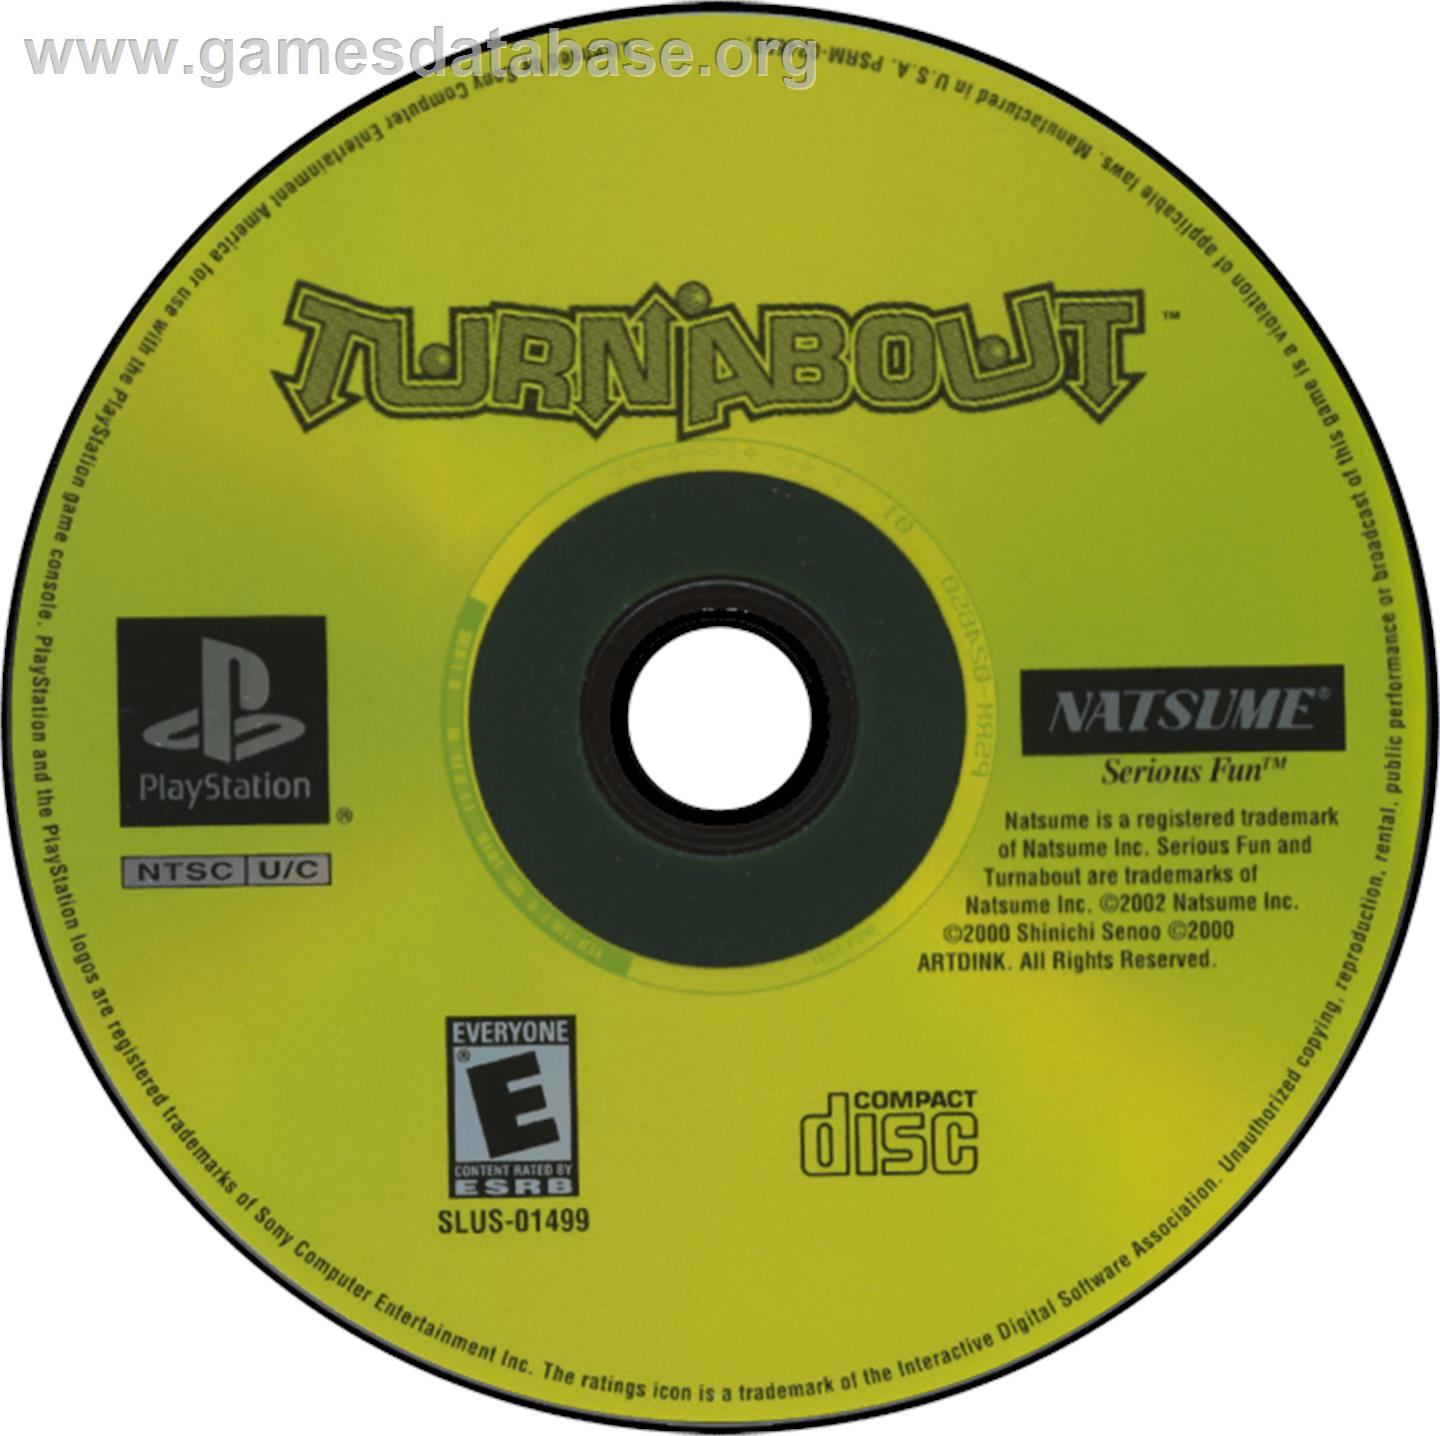 Turnabout - Sony Playstation - Artwork - Disc